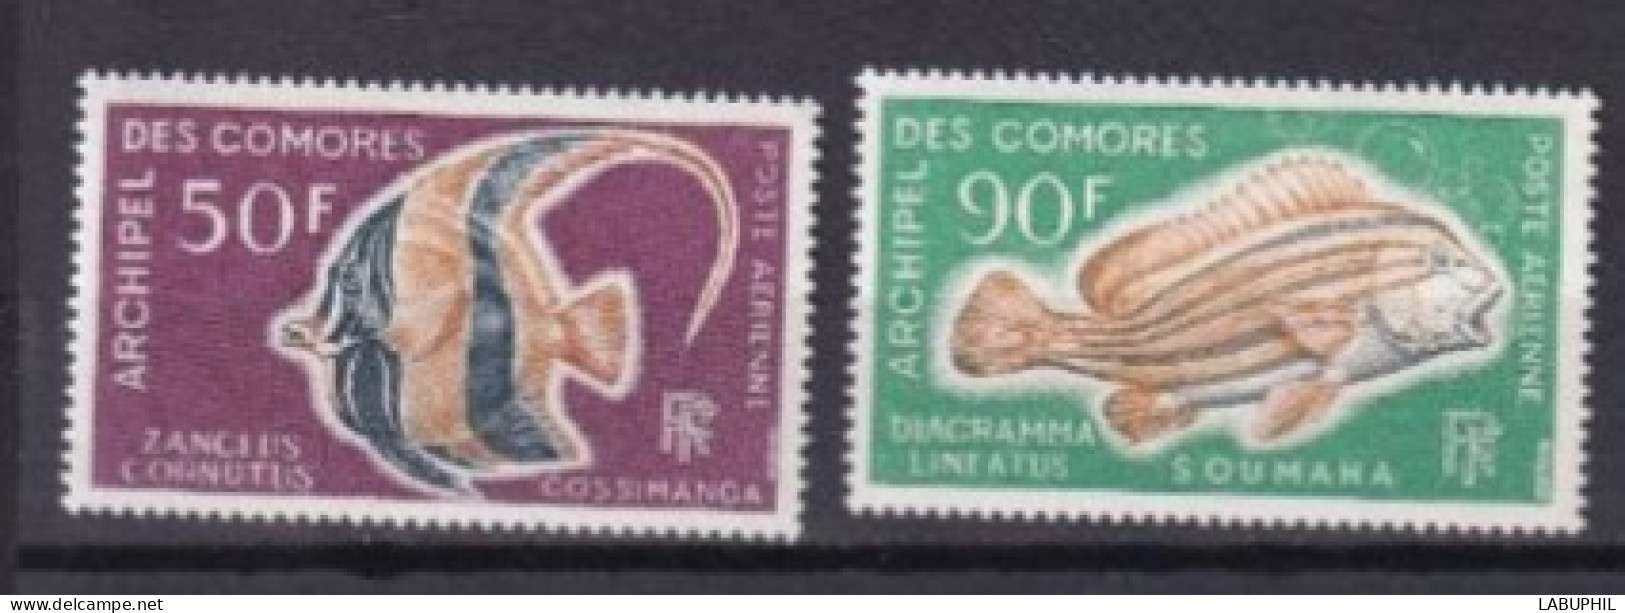 COMORES  NEUF MNH ** Poste Aerienne 1968 Faune Poissons - Unused Stamps